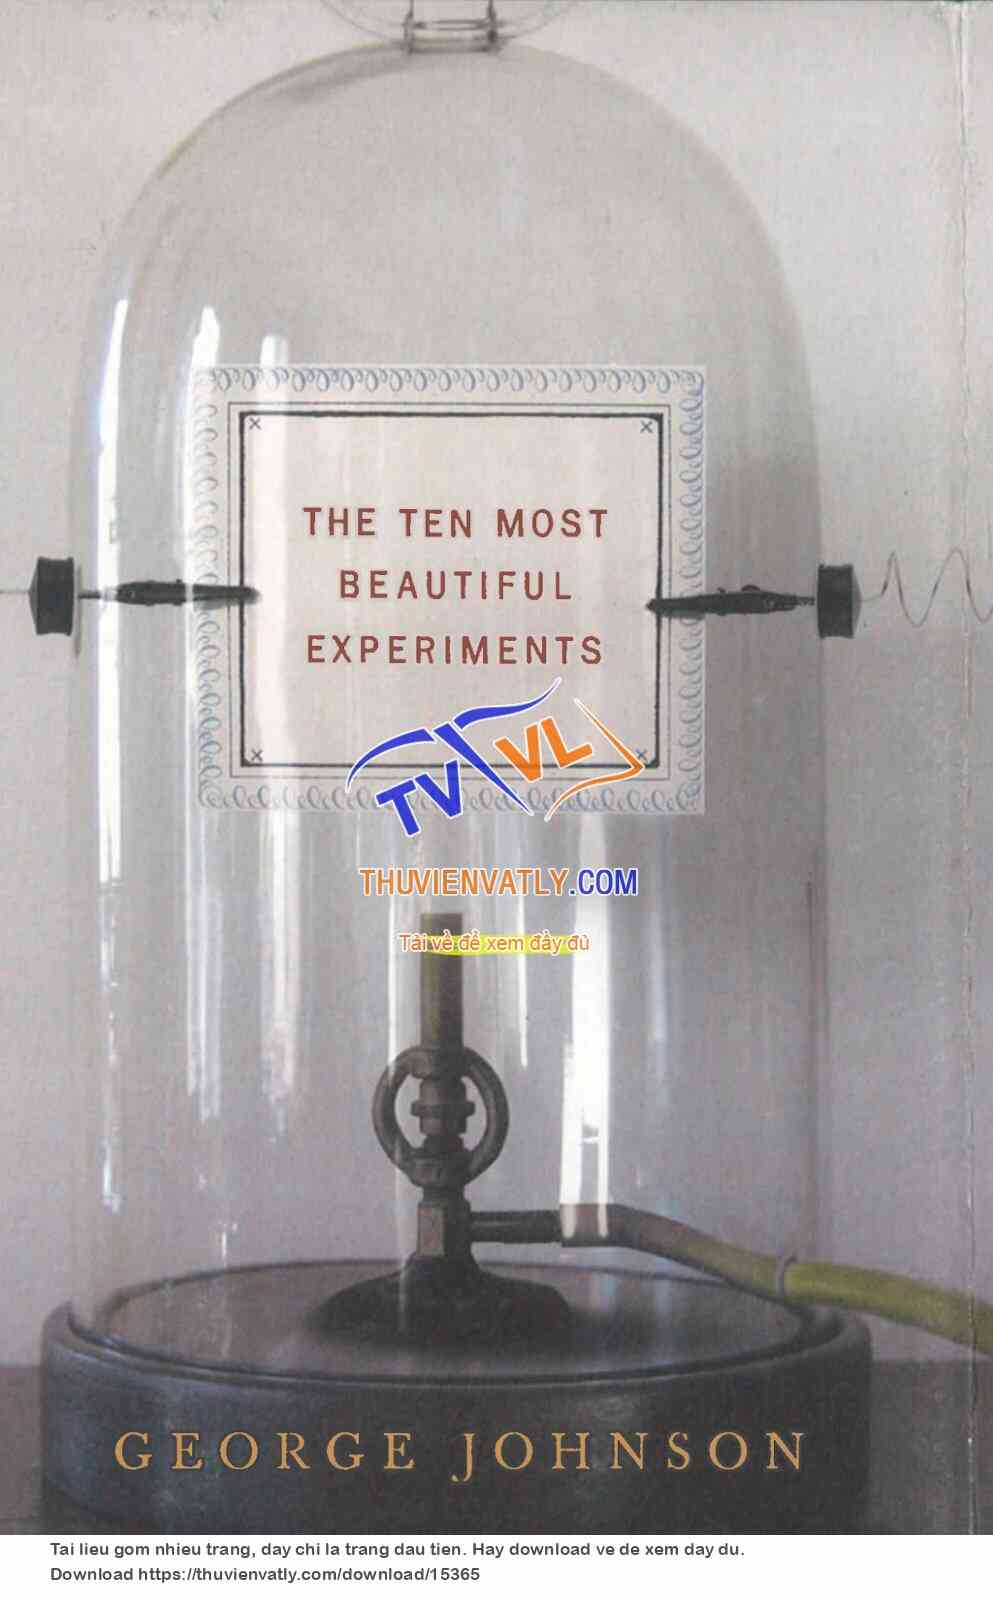 The Ten Most Beautiful Experiments (George Johnson, Aaknopf, 2008)